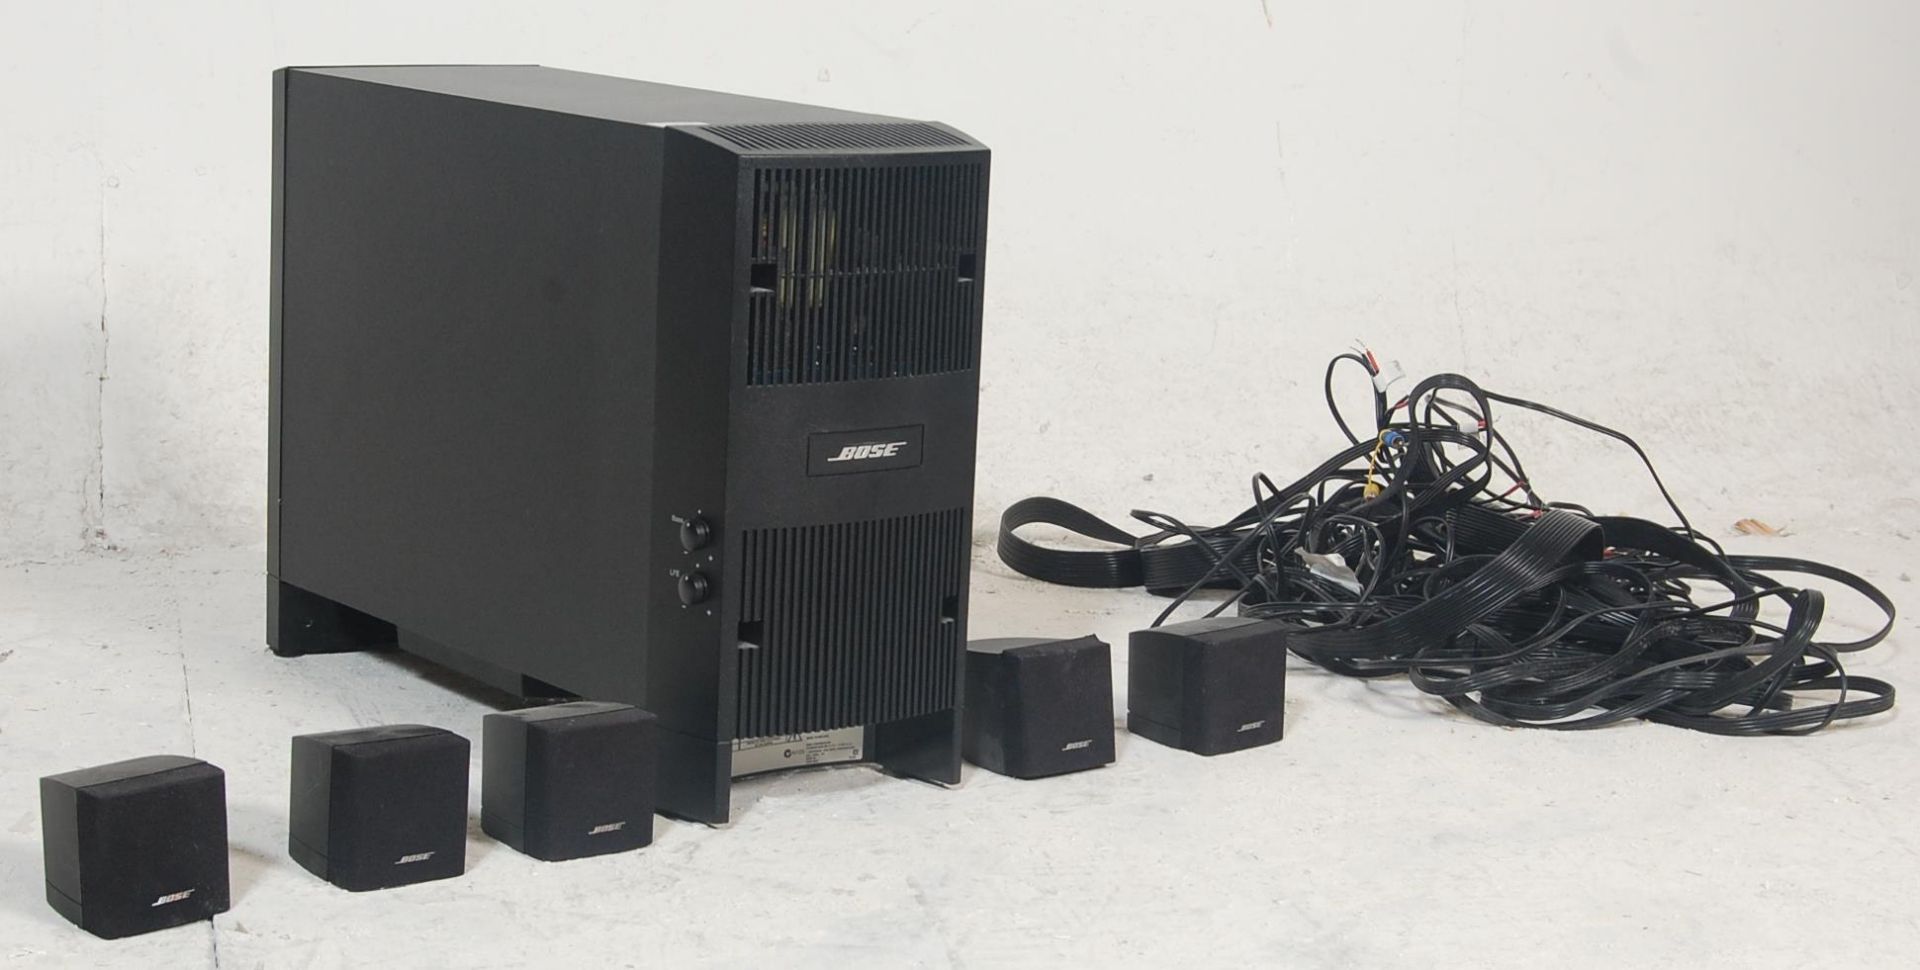 BOSE home cinema 5.1 system with sub woofer and five cube speakers. This system is powered (